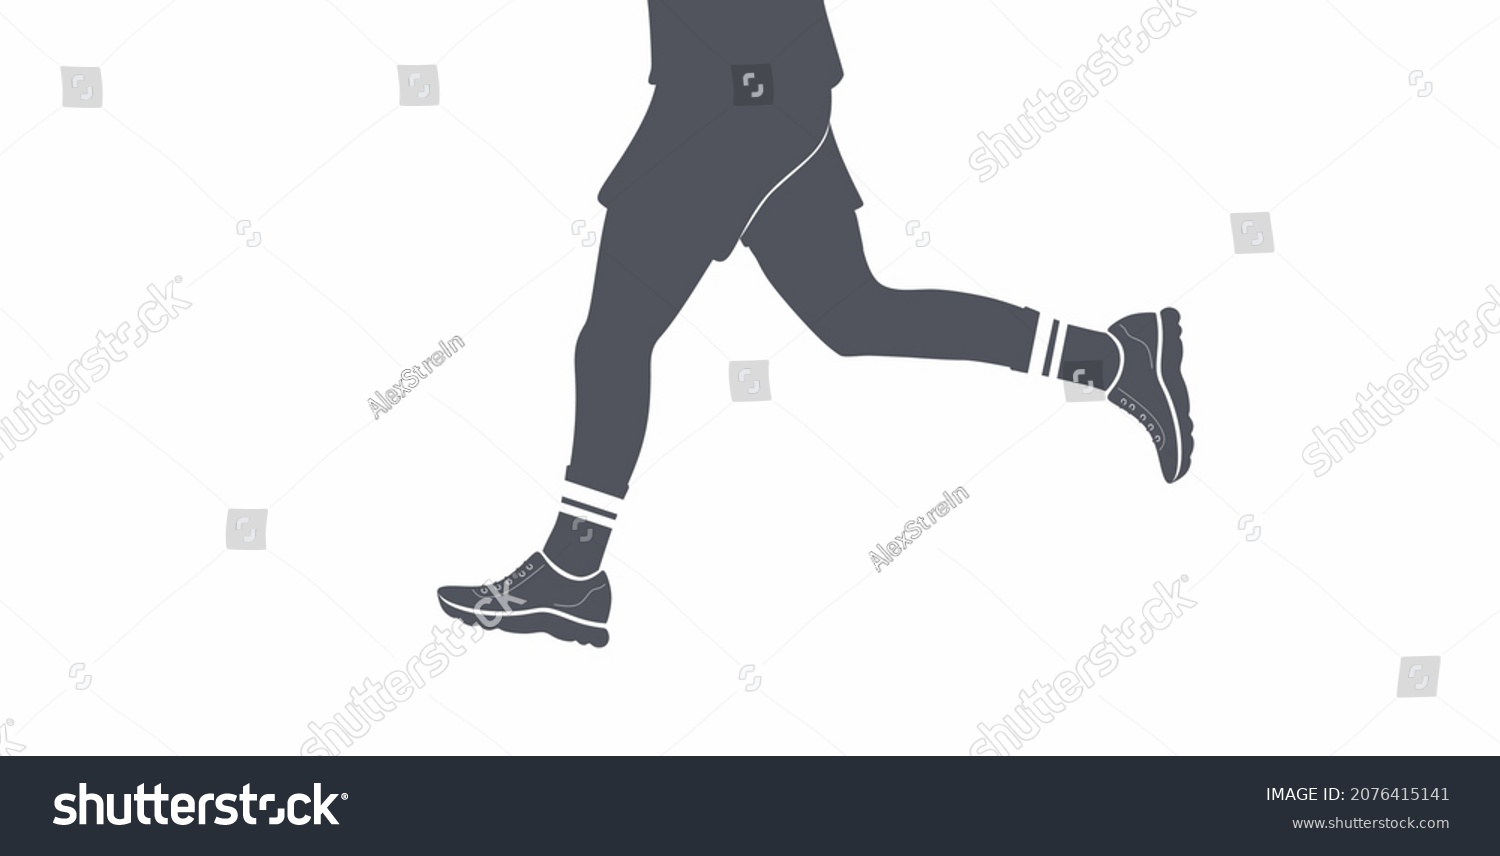 SVG of Run. Jogging. Man or woman running outside in shorts and sneakers. SVG. Silhouette. Runner training. Active leisure. Health lifestyle. Outdoor recreation activity. Flat vector  illustration. Isolated. svg